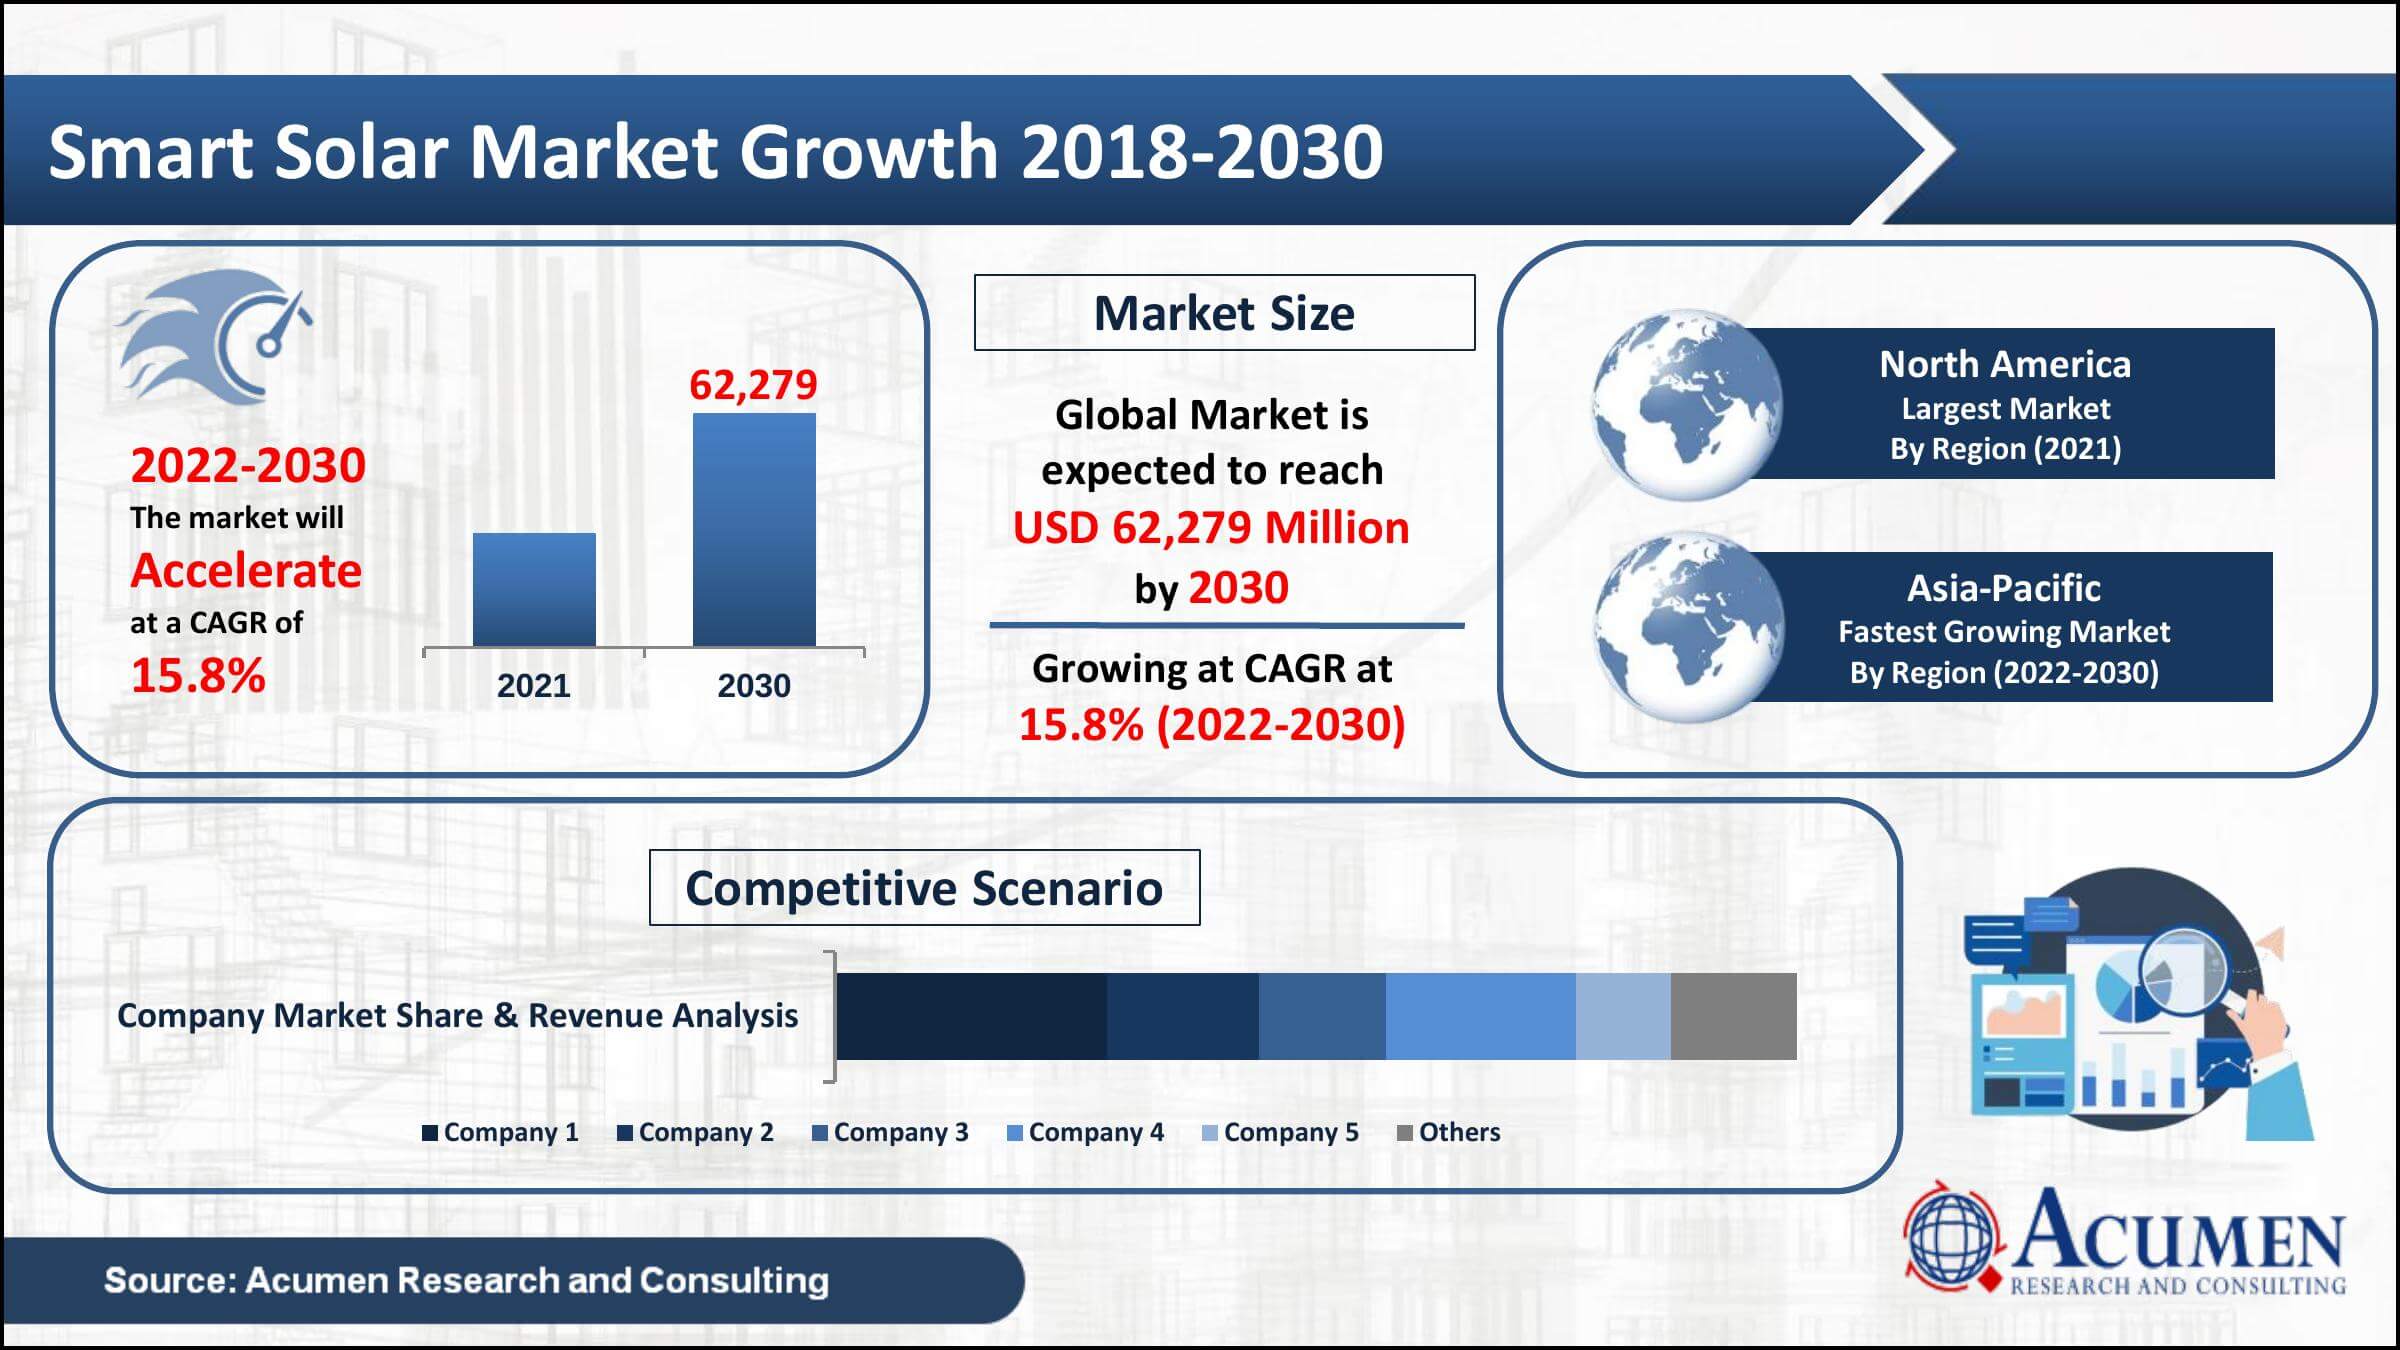 Smart Solar Market Size was USD 16.9 Billion in 2021 and is expected to reach USD 62.3 Billion by 2030